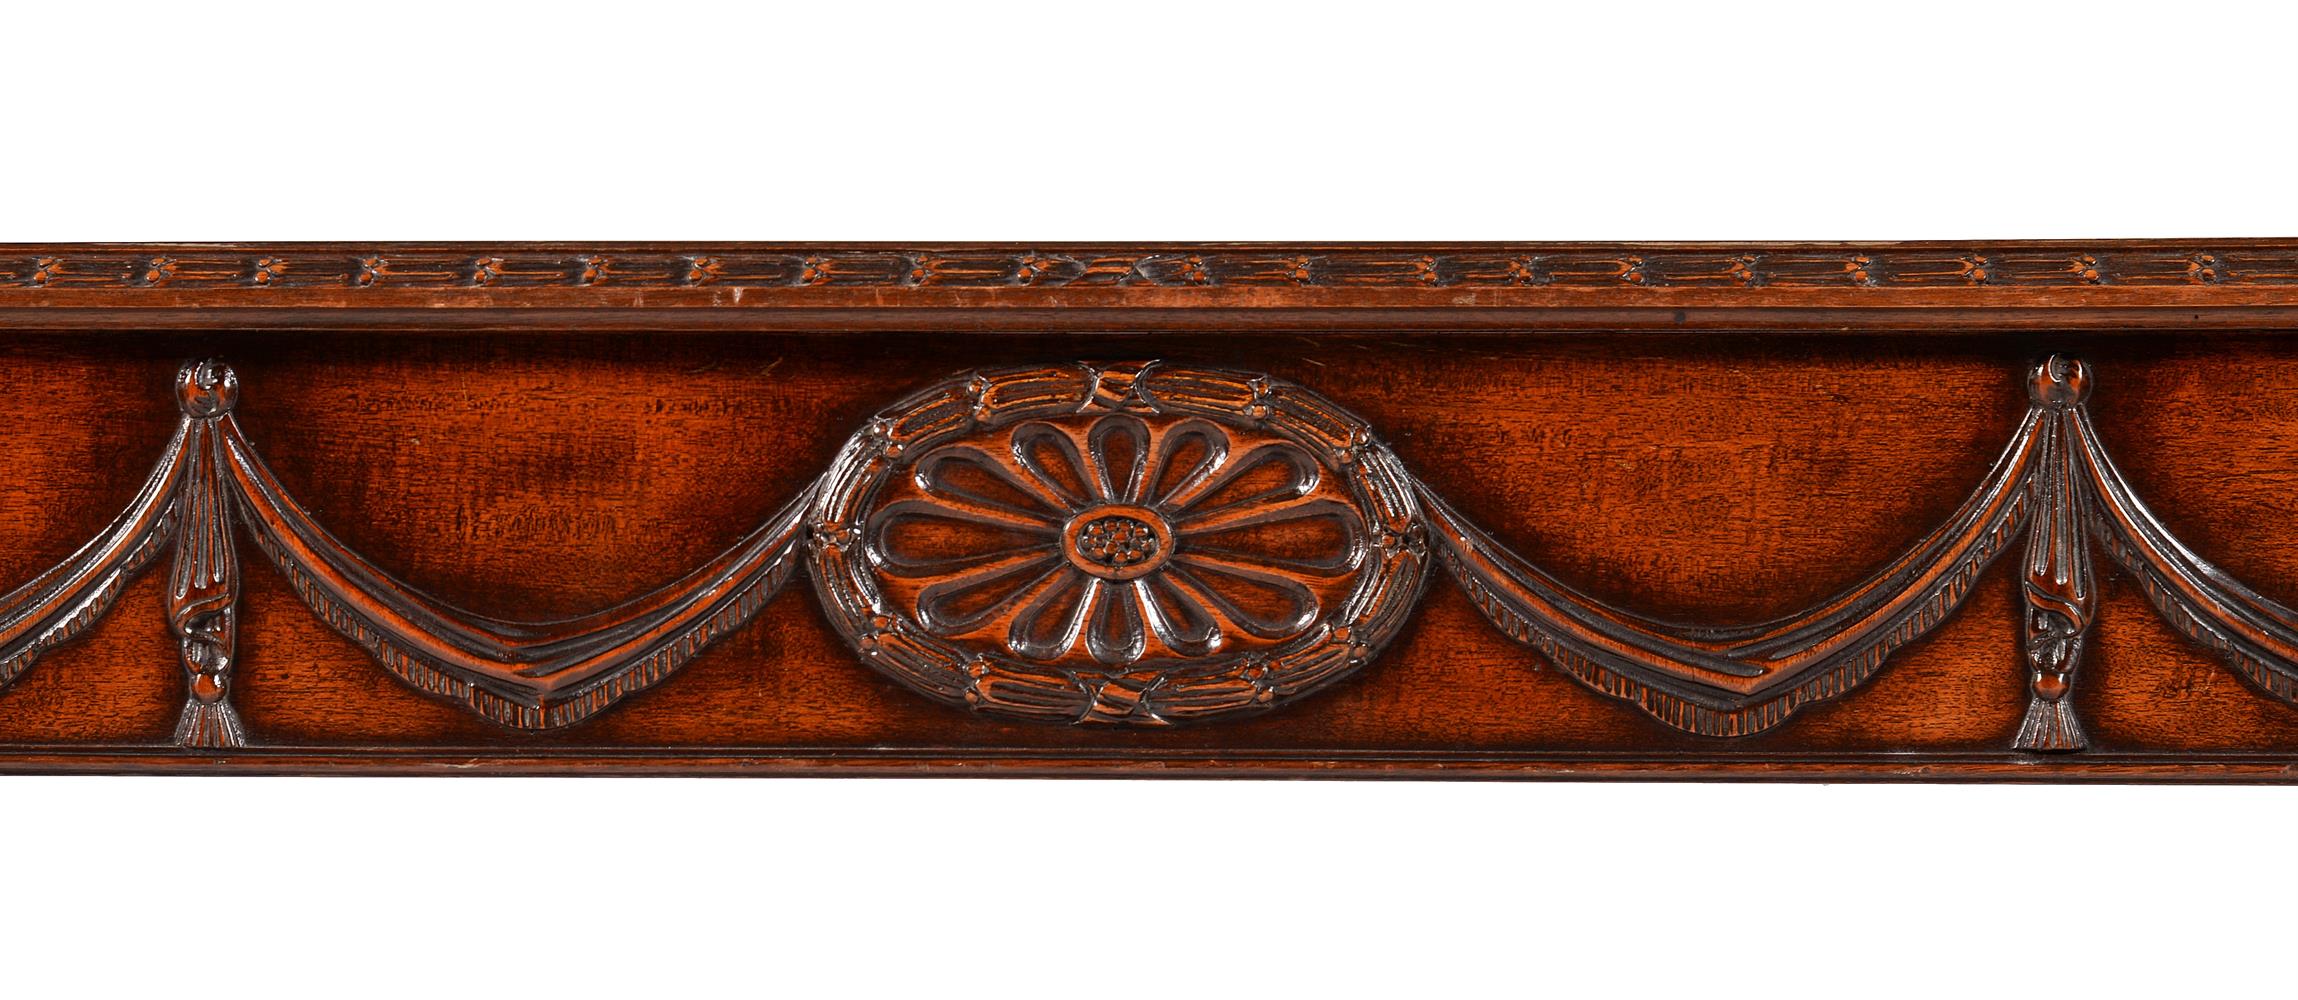 AN EDWARDIAN MAHOGANY SIDE TABLEI, N THE MANNER OF ROBERT ADAM - Image 3 of 5